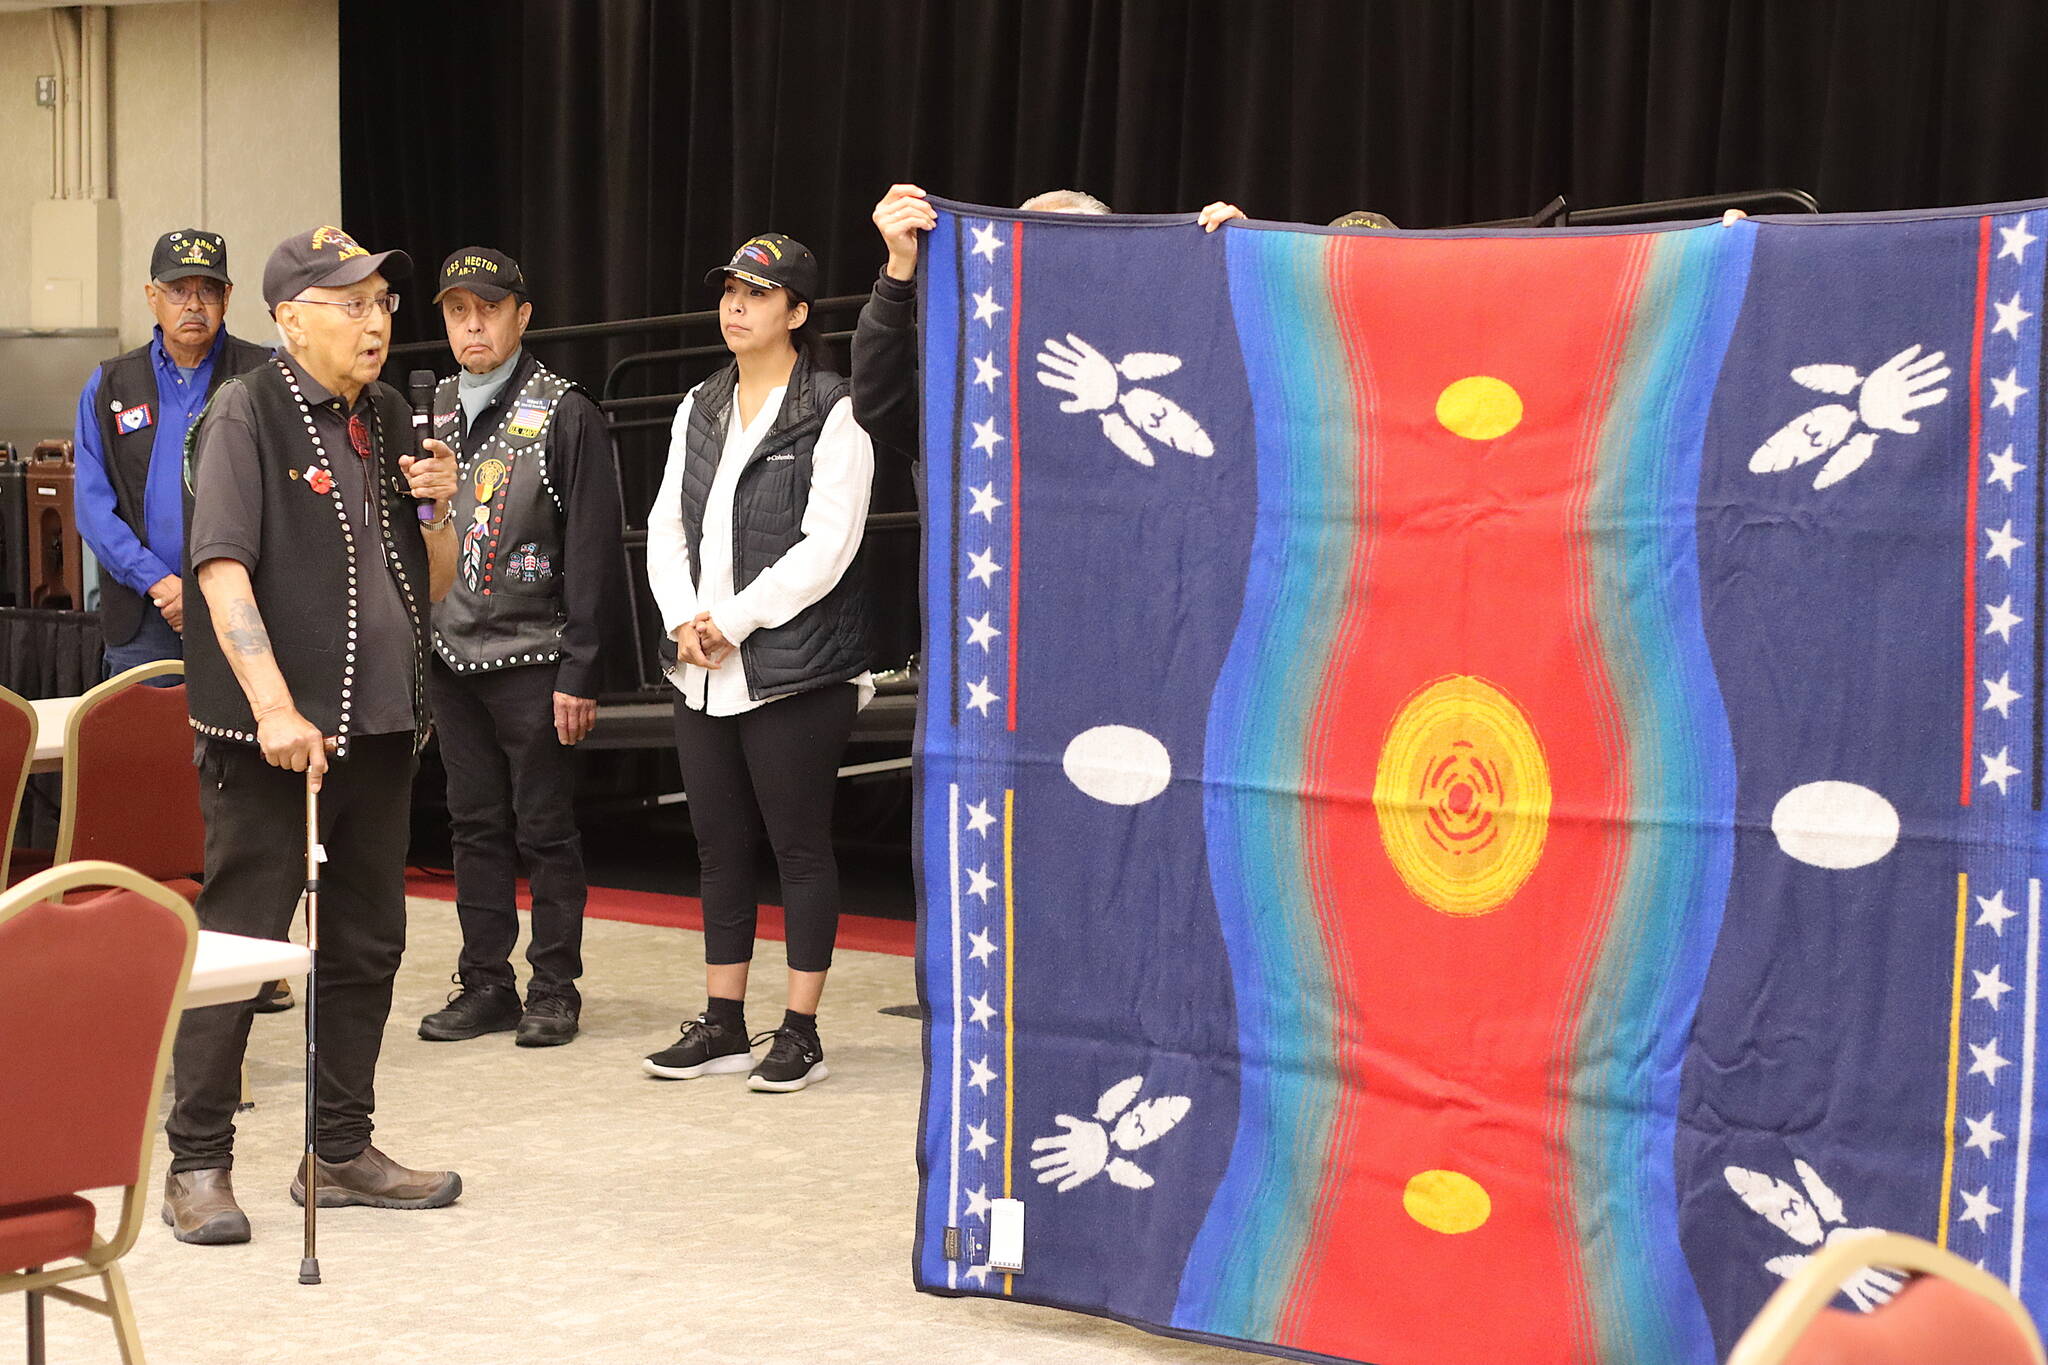 Ray Wilson, who served in the Army during the Korean War, explains the Warriors Circle of Honor Blanket he received last year as a tribute on his 90th birthday during the Southeast Alaska Native Veterans Memorial Day observance at Elizabeth Peratrovich Hall on Monday. (Mark Sabbatini / Juneau Empire)